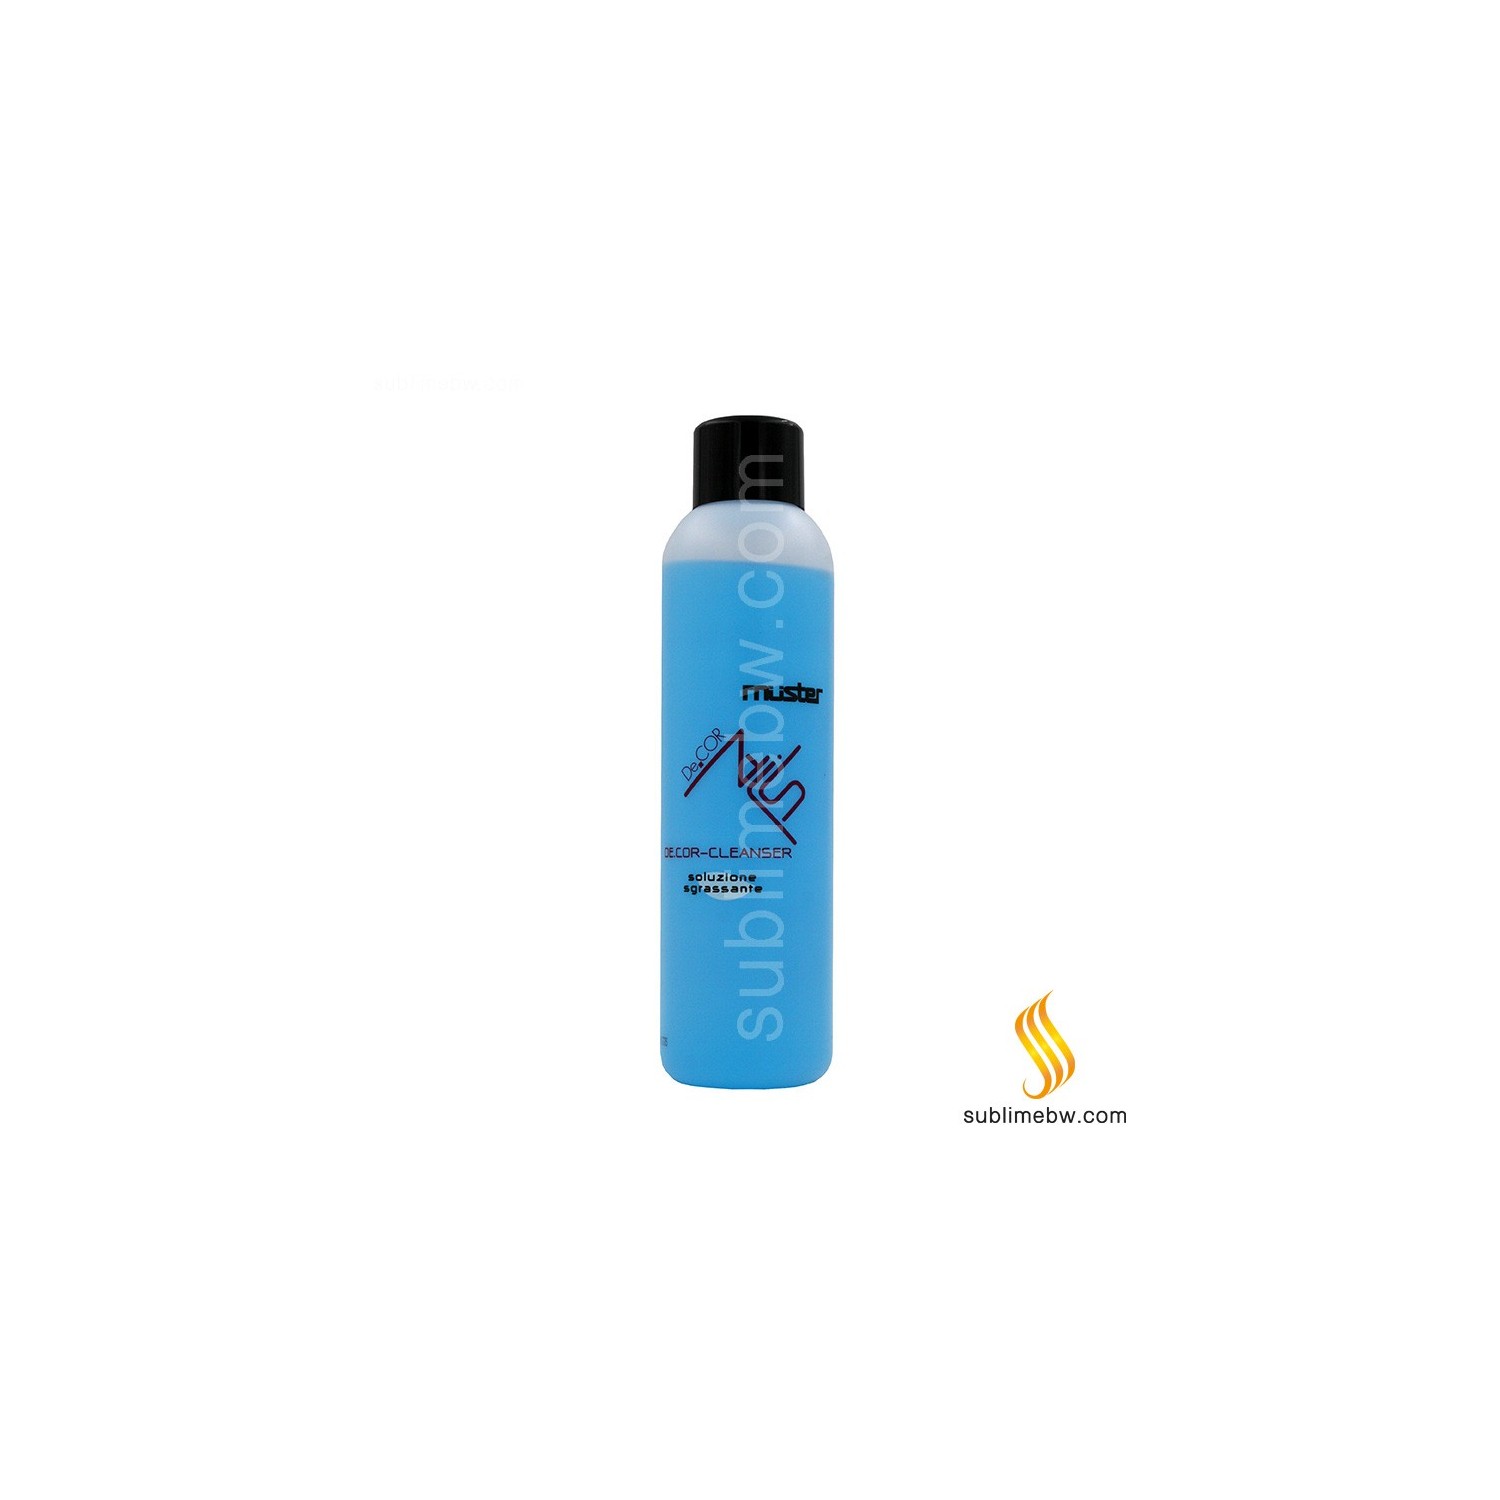 Muster Solucion Decor-cleans Uñas 500 Ml